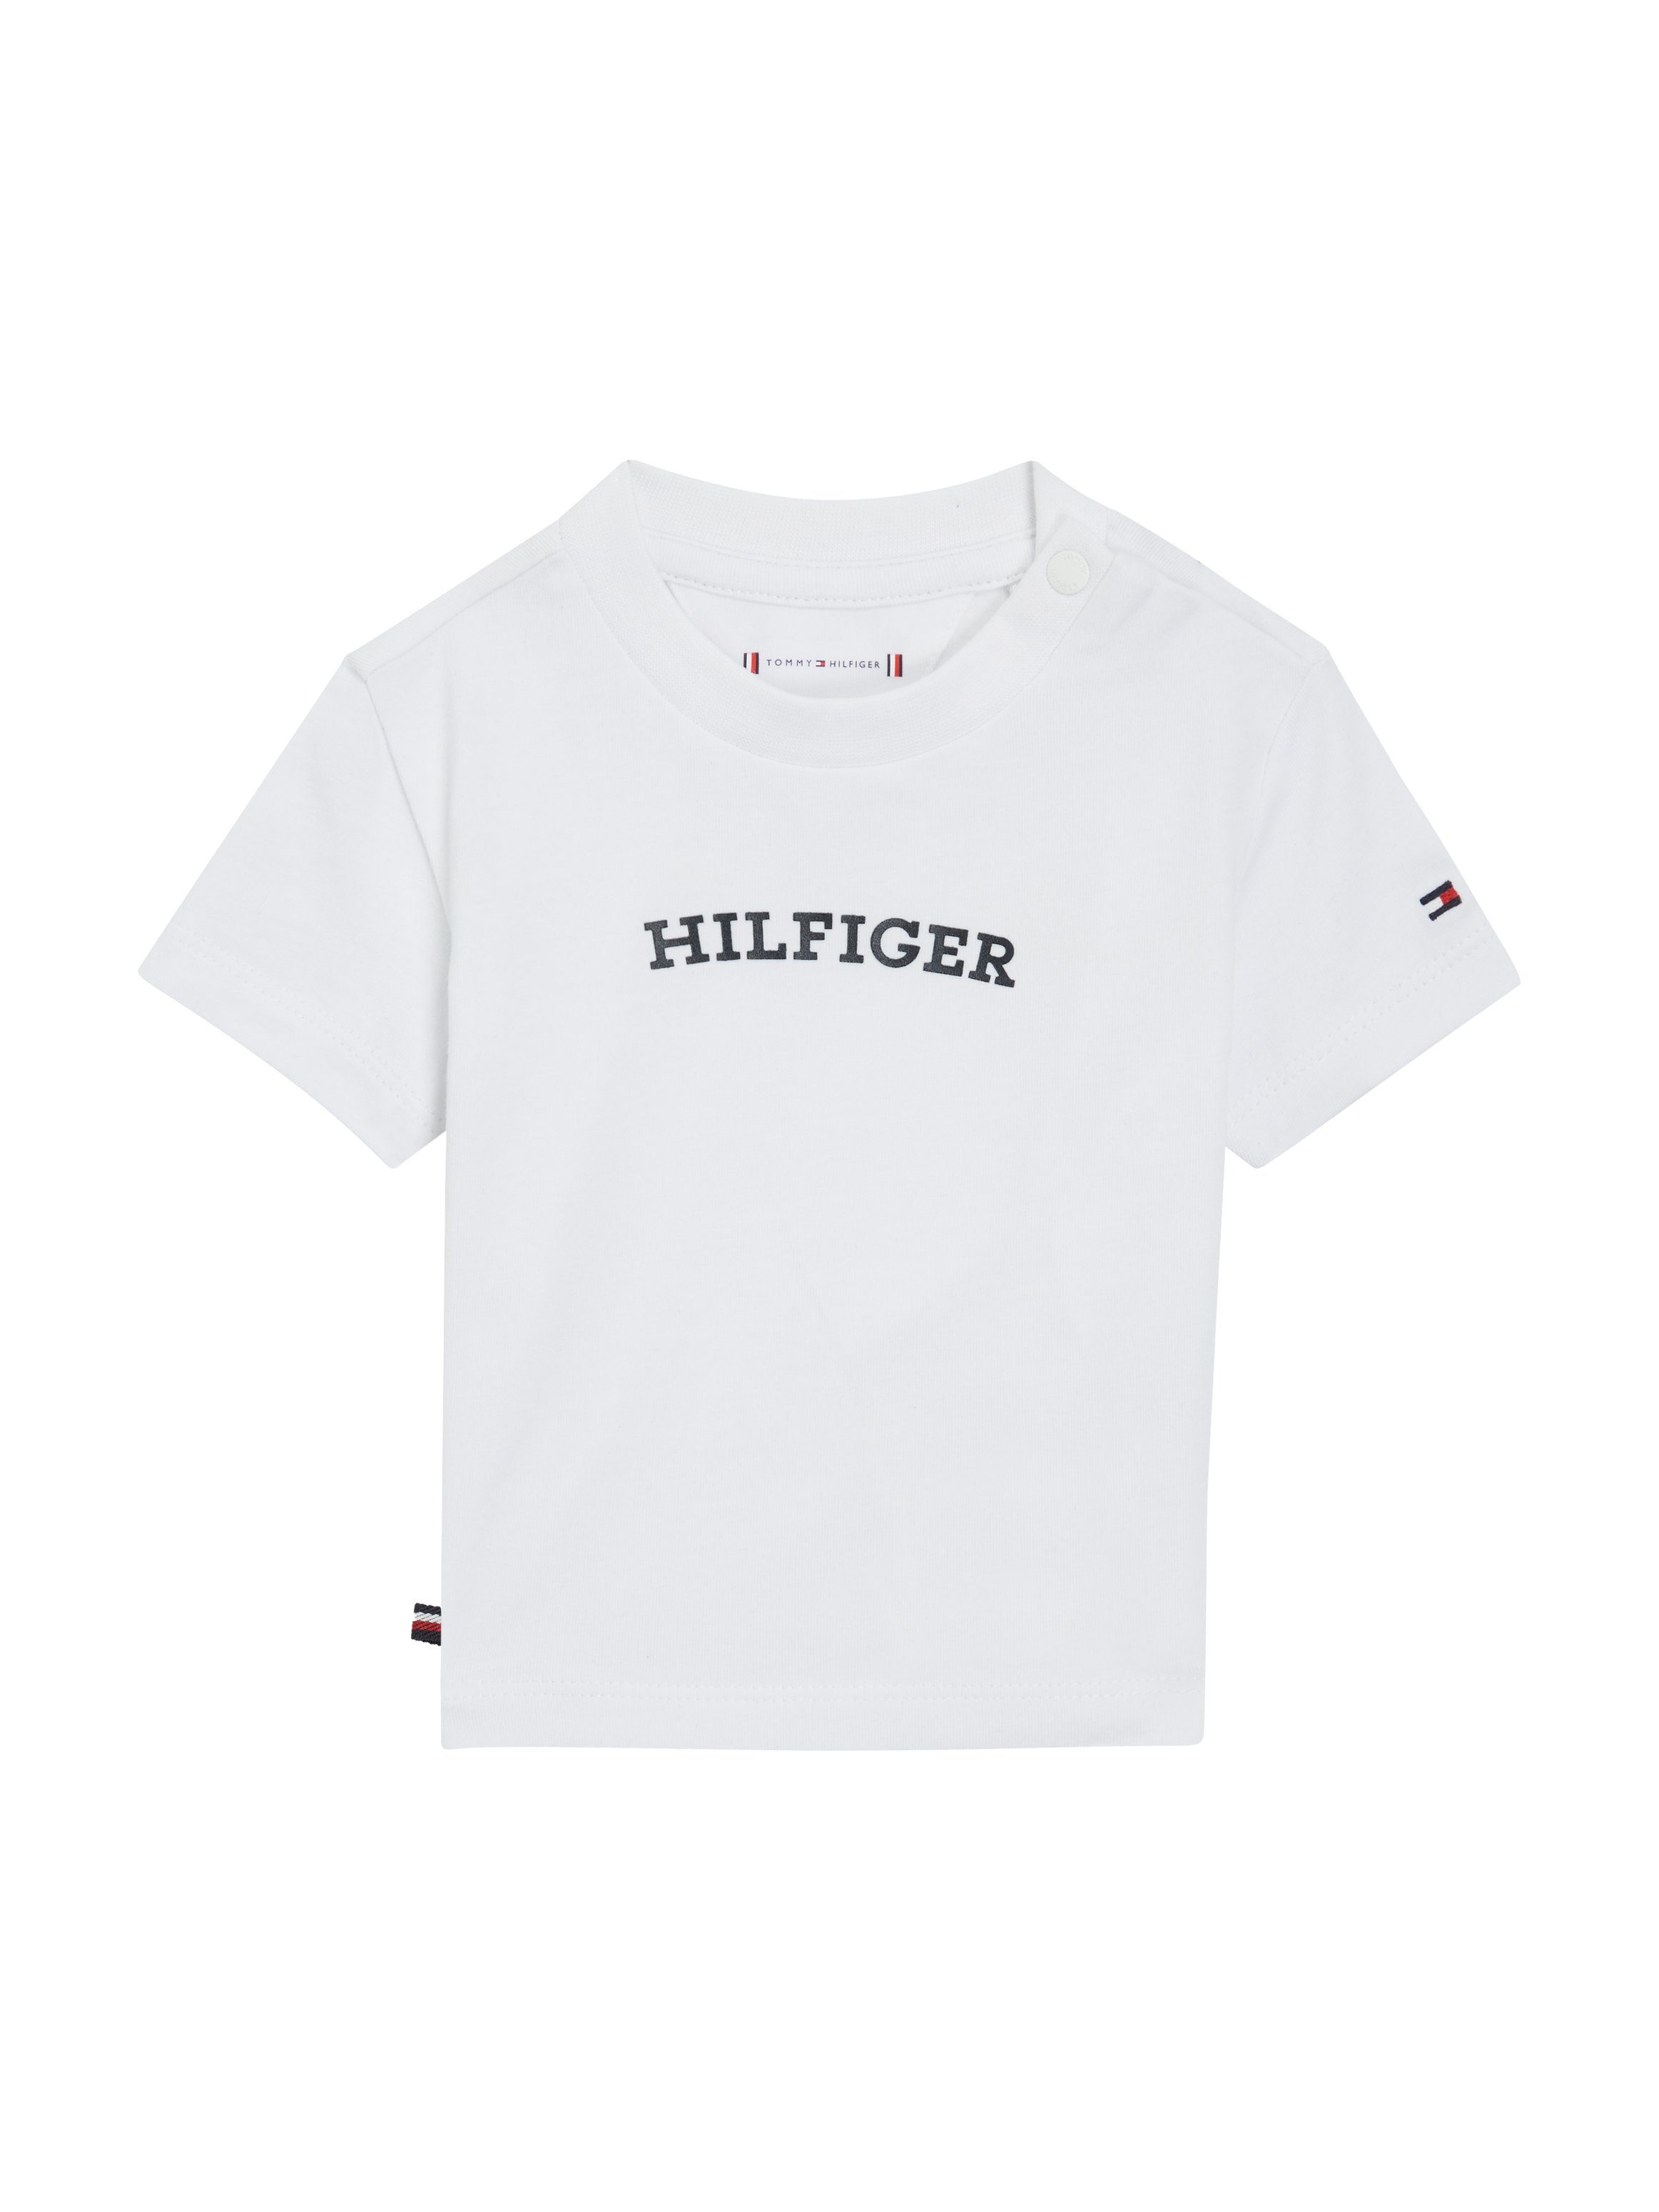 TEE & großem Print Hilfiger mit S/S BABY MONOTYPE White T-Shirt Hilfiger CURVED Front Logo-Flag Tommy